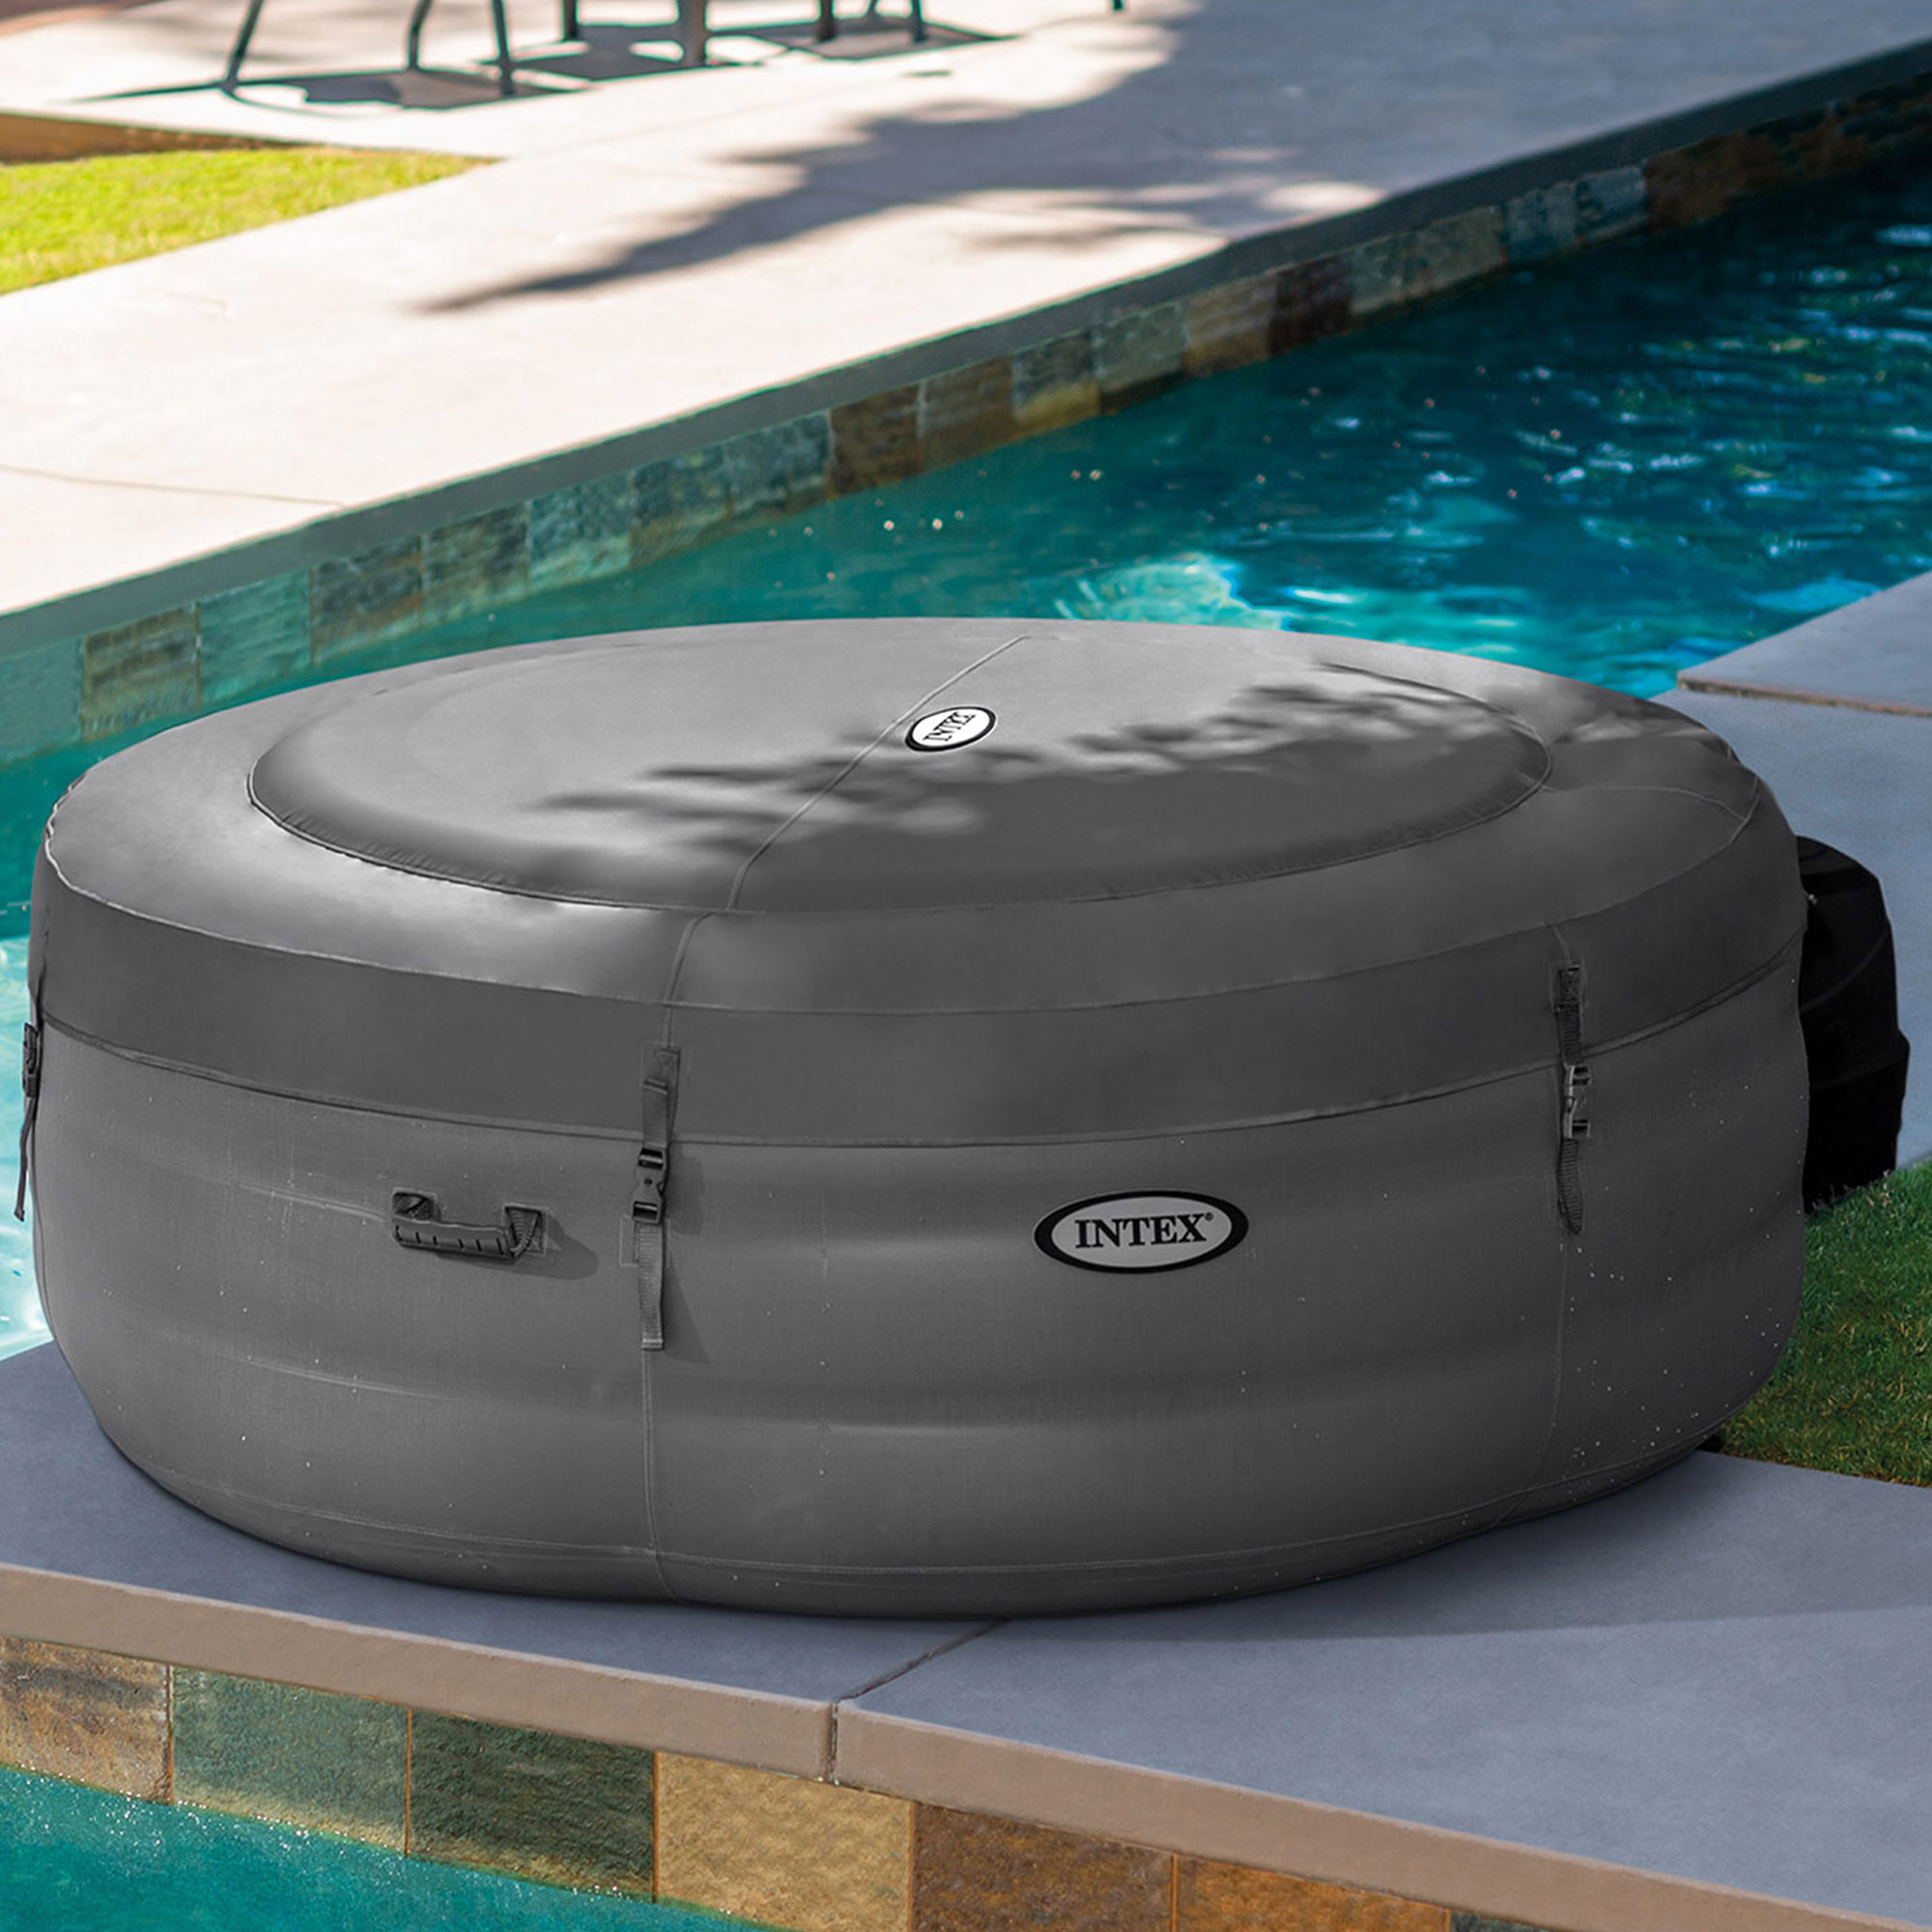 INTEX PureSpa Plus Greywood Deluxe 4-Person Inflatable Hot Tub Spa w/ Jets - image 4 of 9